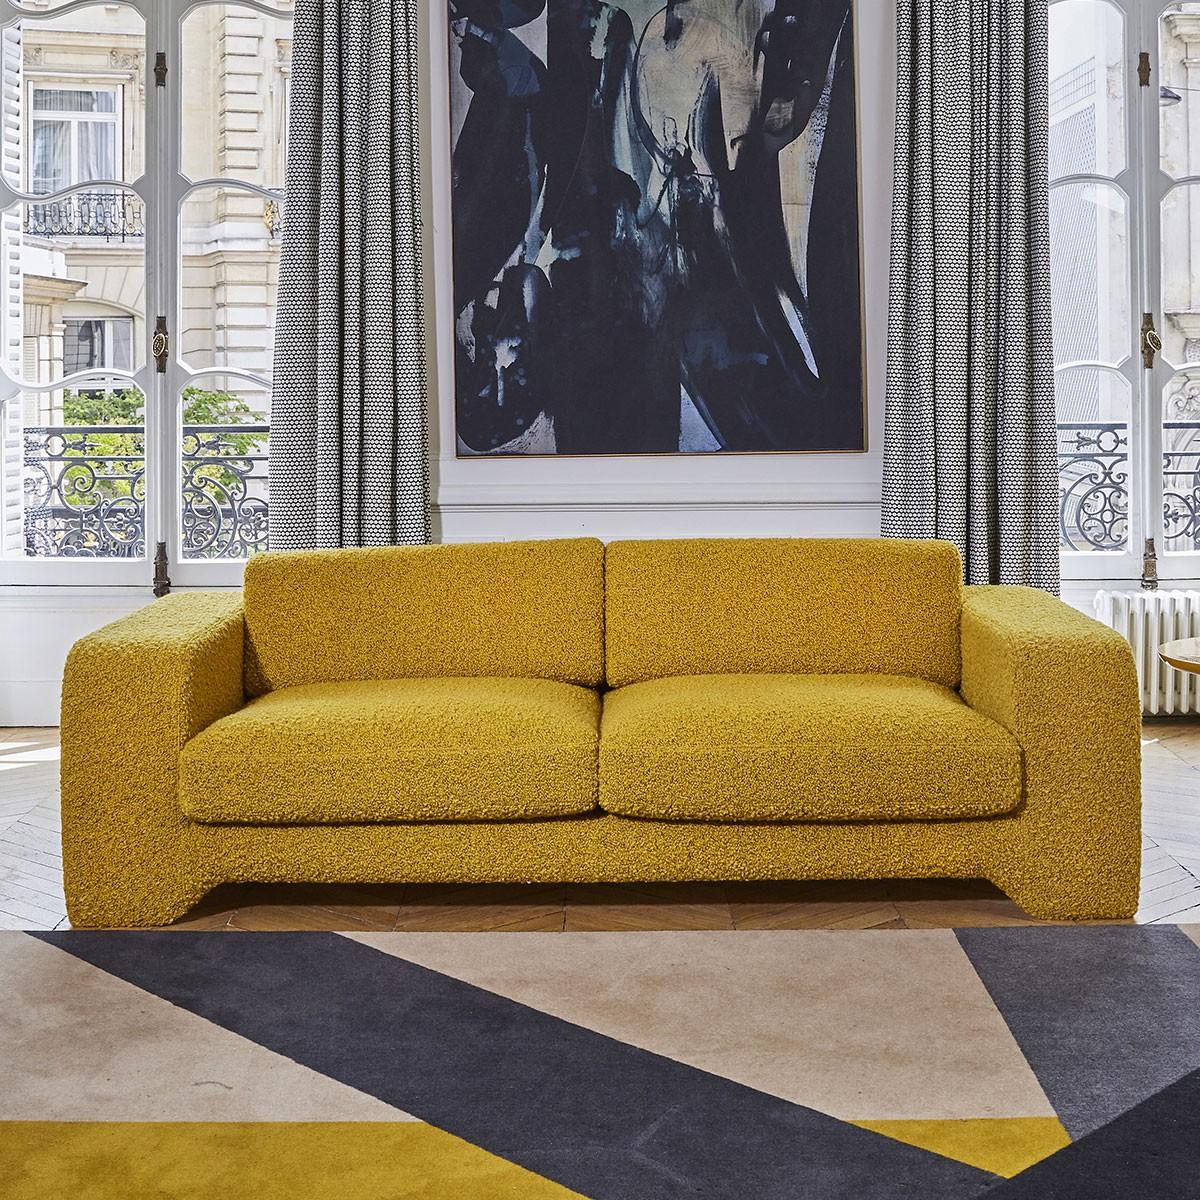 Popus Editions Giovanna 2.5 seater sofa in marine navy como velvet upholstery

Giovanna is a sofa with a strong profile. A sober, plush line, with this famous detail that changes everything, so as not to forget its strength of character and this